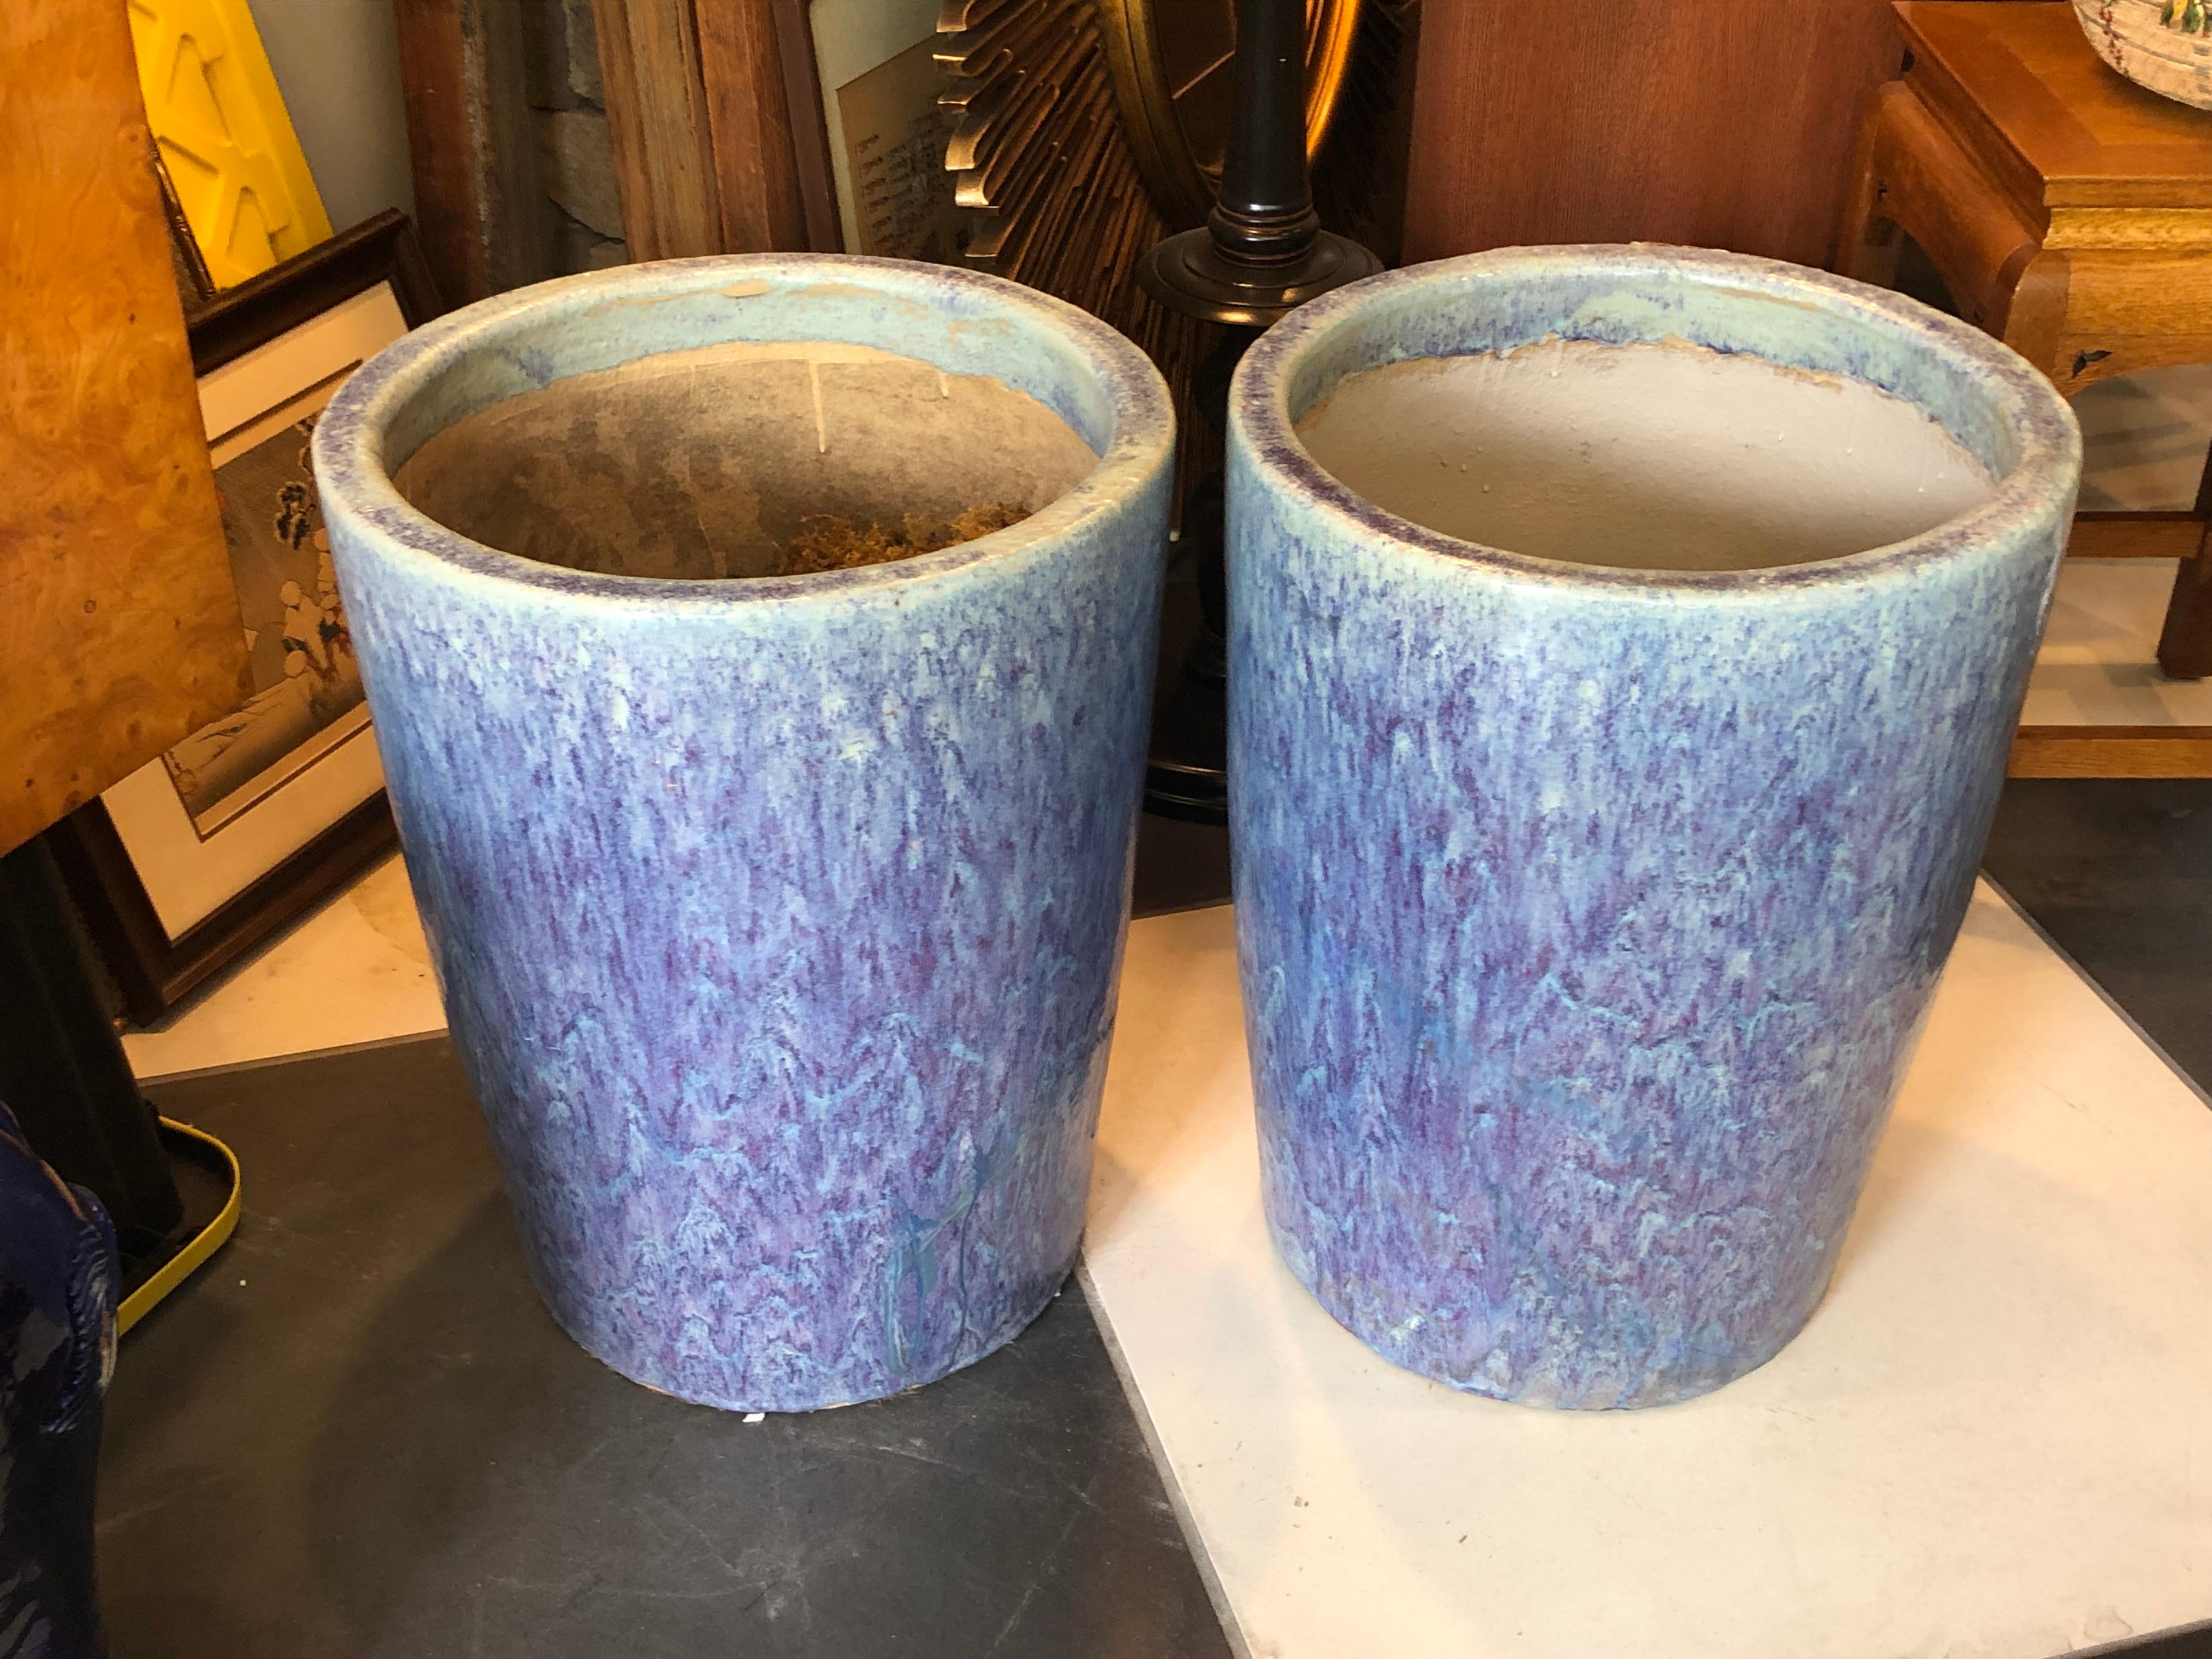 These planters are from the Shi Wan Kiln, in Guangzhou, China Made by the Yuhua Ceramic Company sometime between, circa 1912-1949 You can also use these as side tables using a piece of glass, etc. They are the same size.